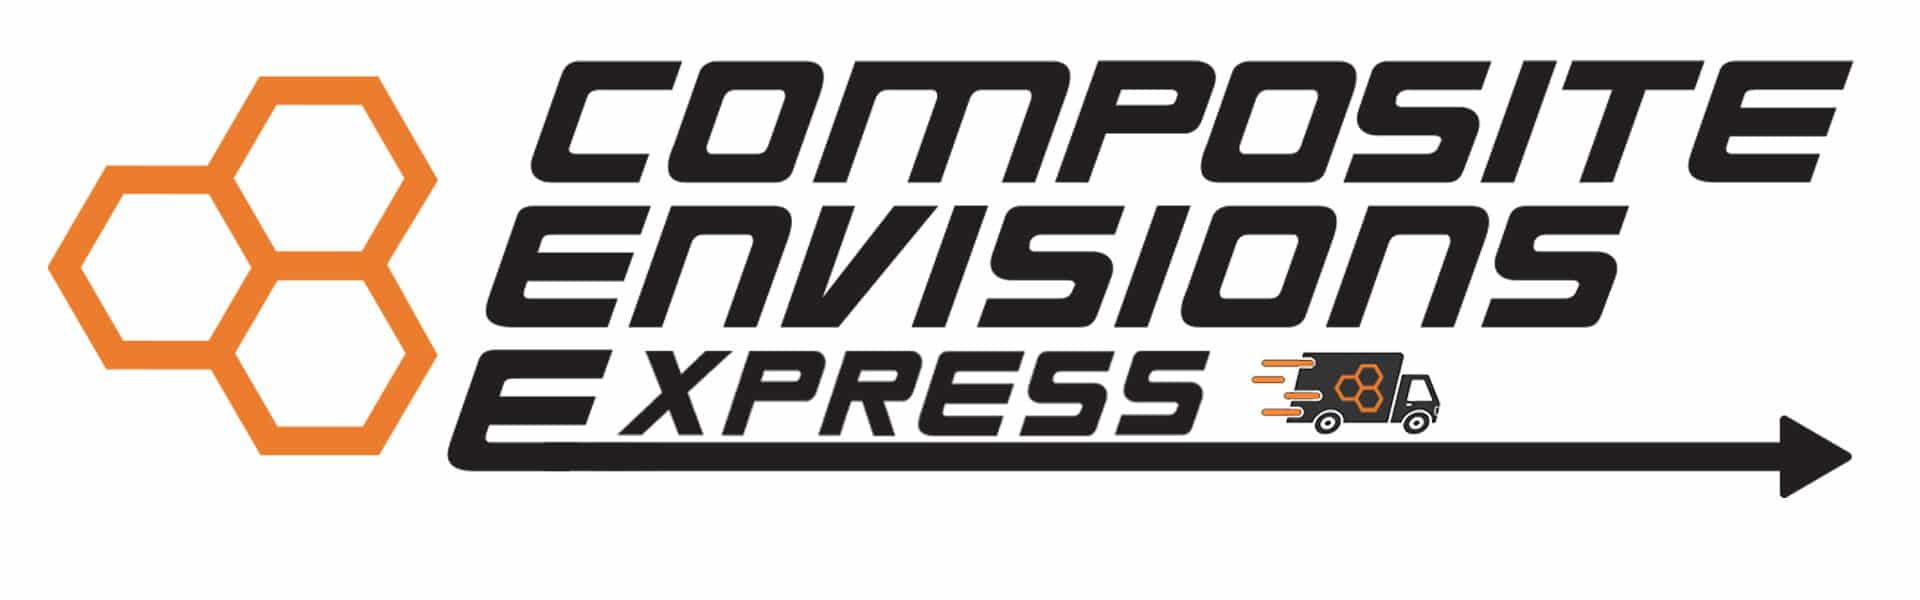 Introducing Composite Envisions Express!